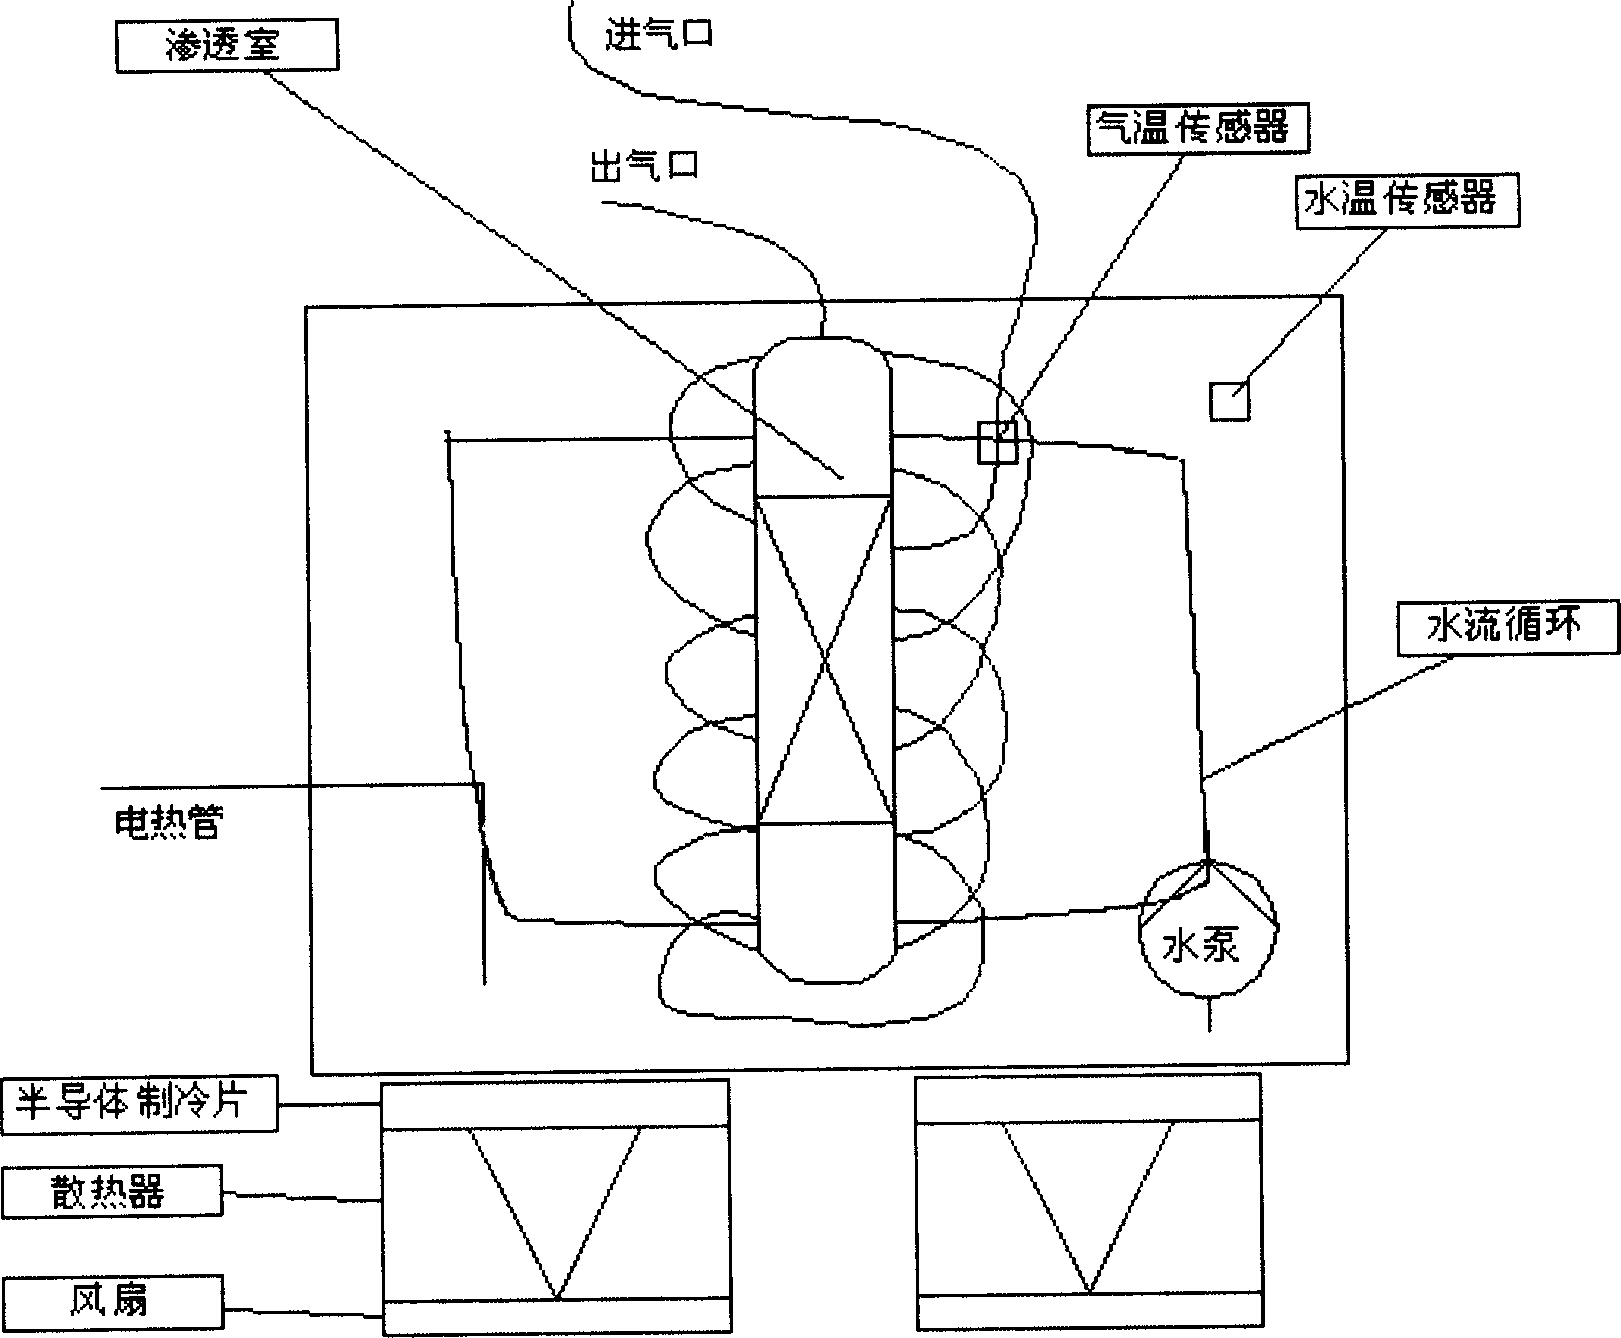 Dynamic distributing system for standard gas